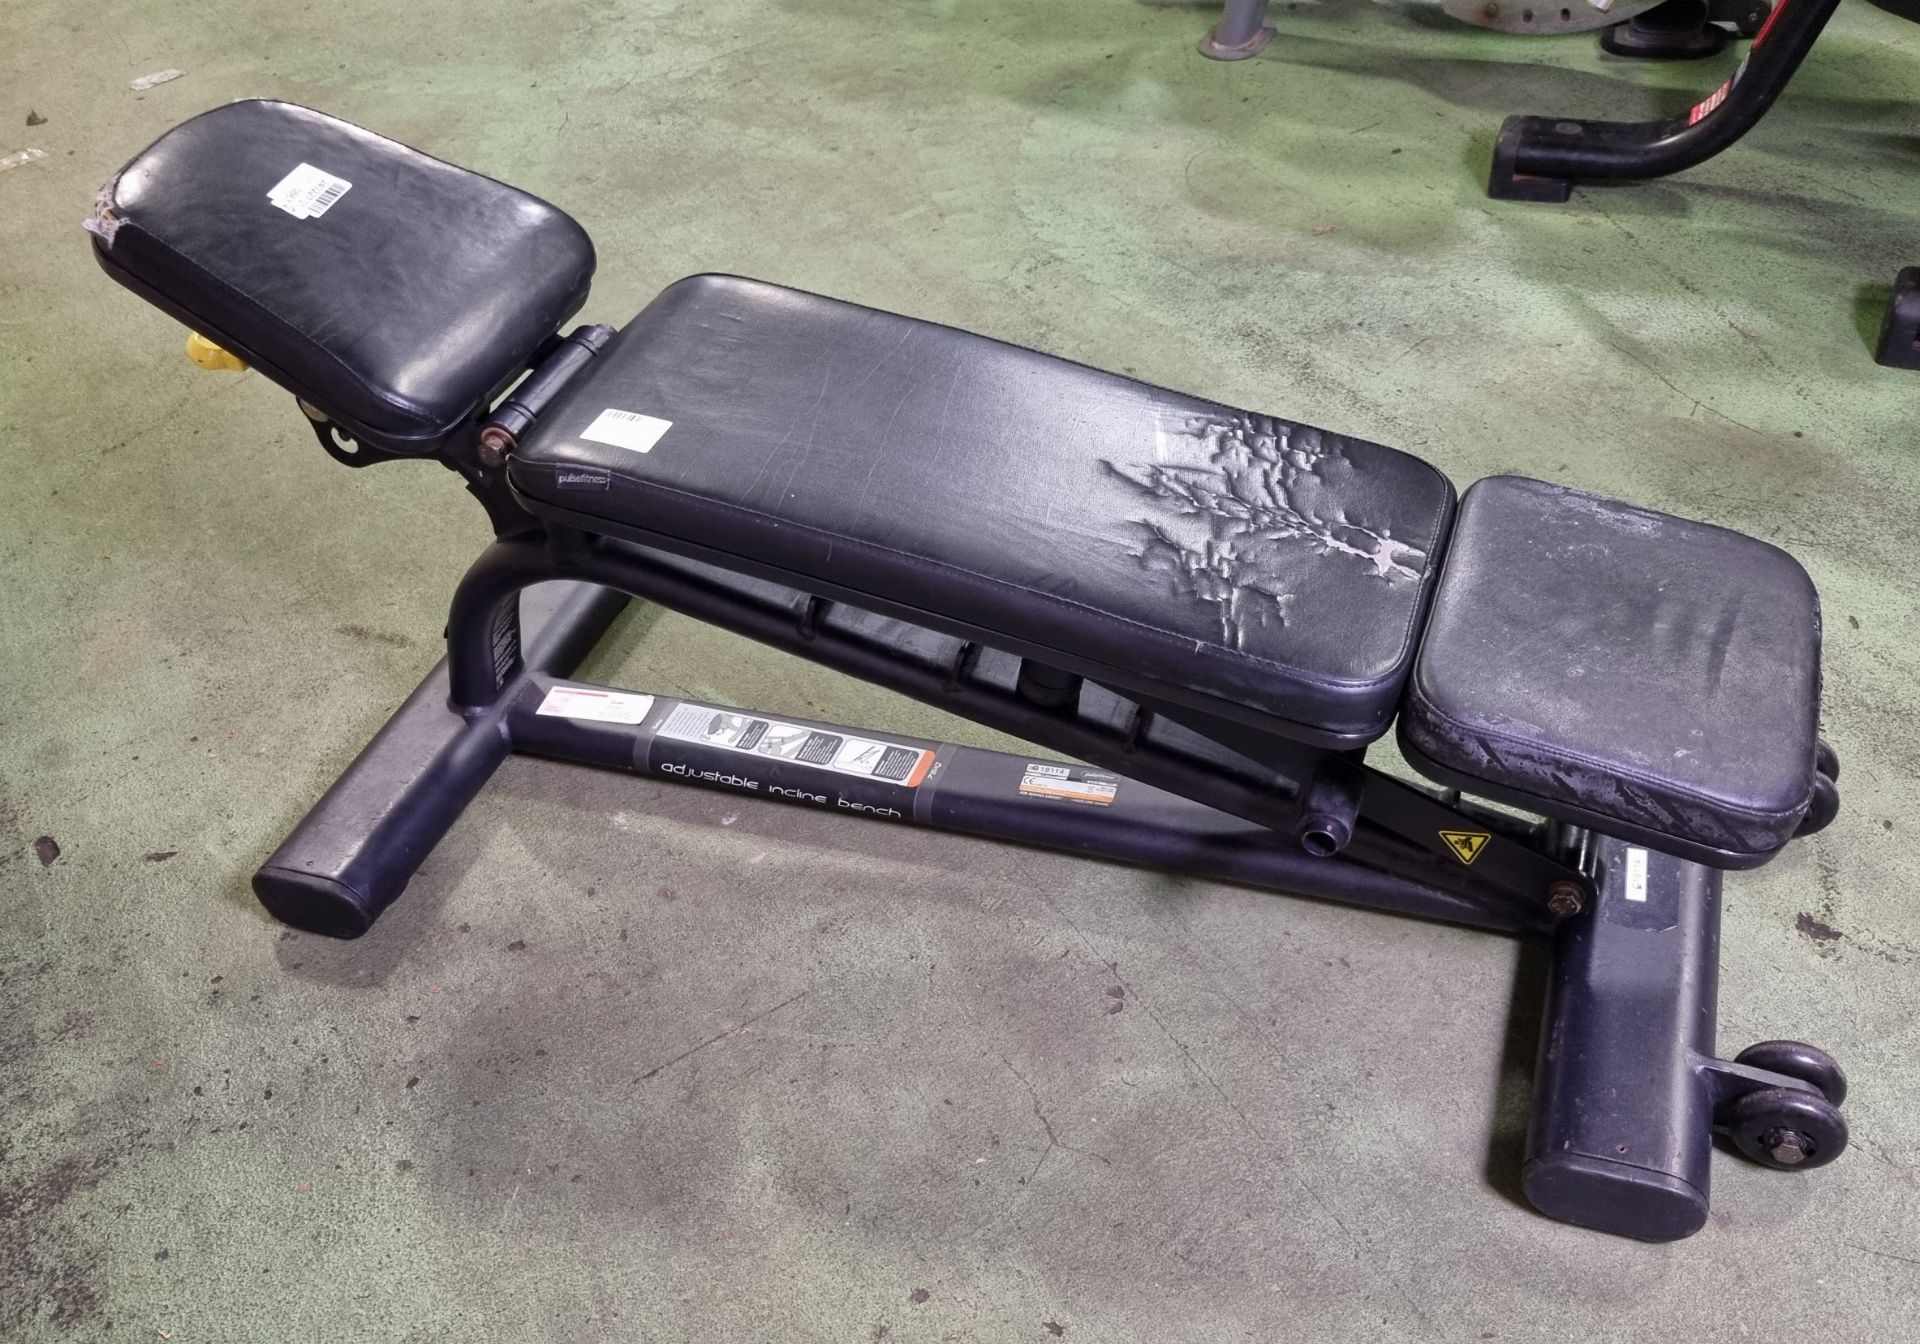 Pulse Fitness 751G adjustable incline bench - damage to seat - W 1300 x D 600 x H 470 mm